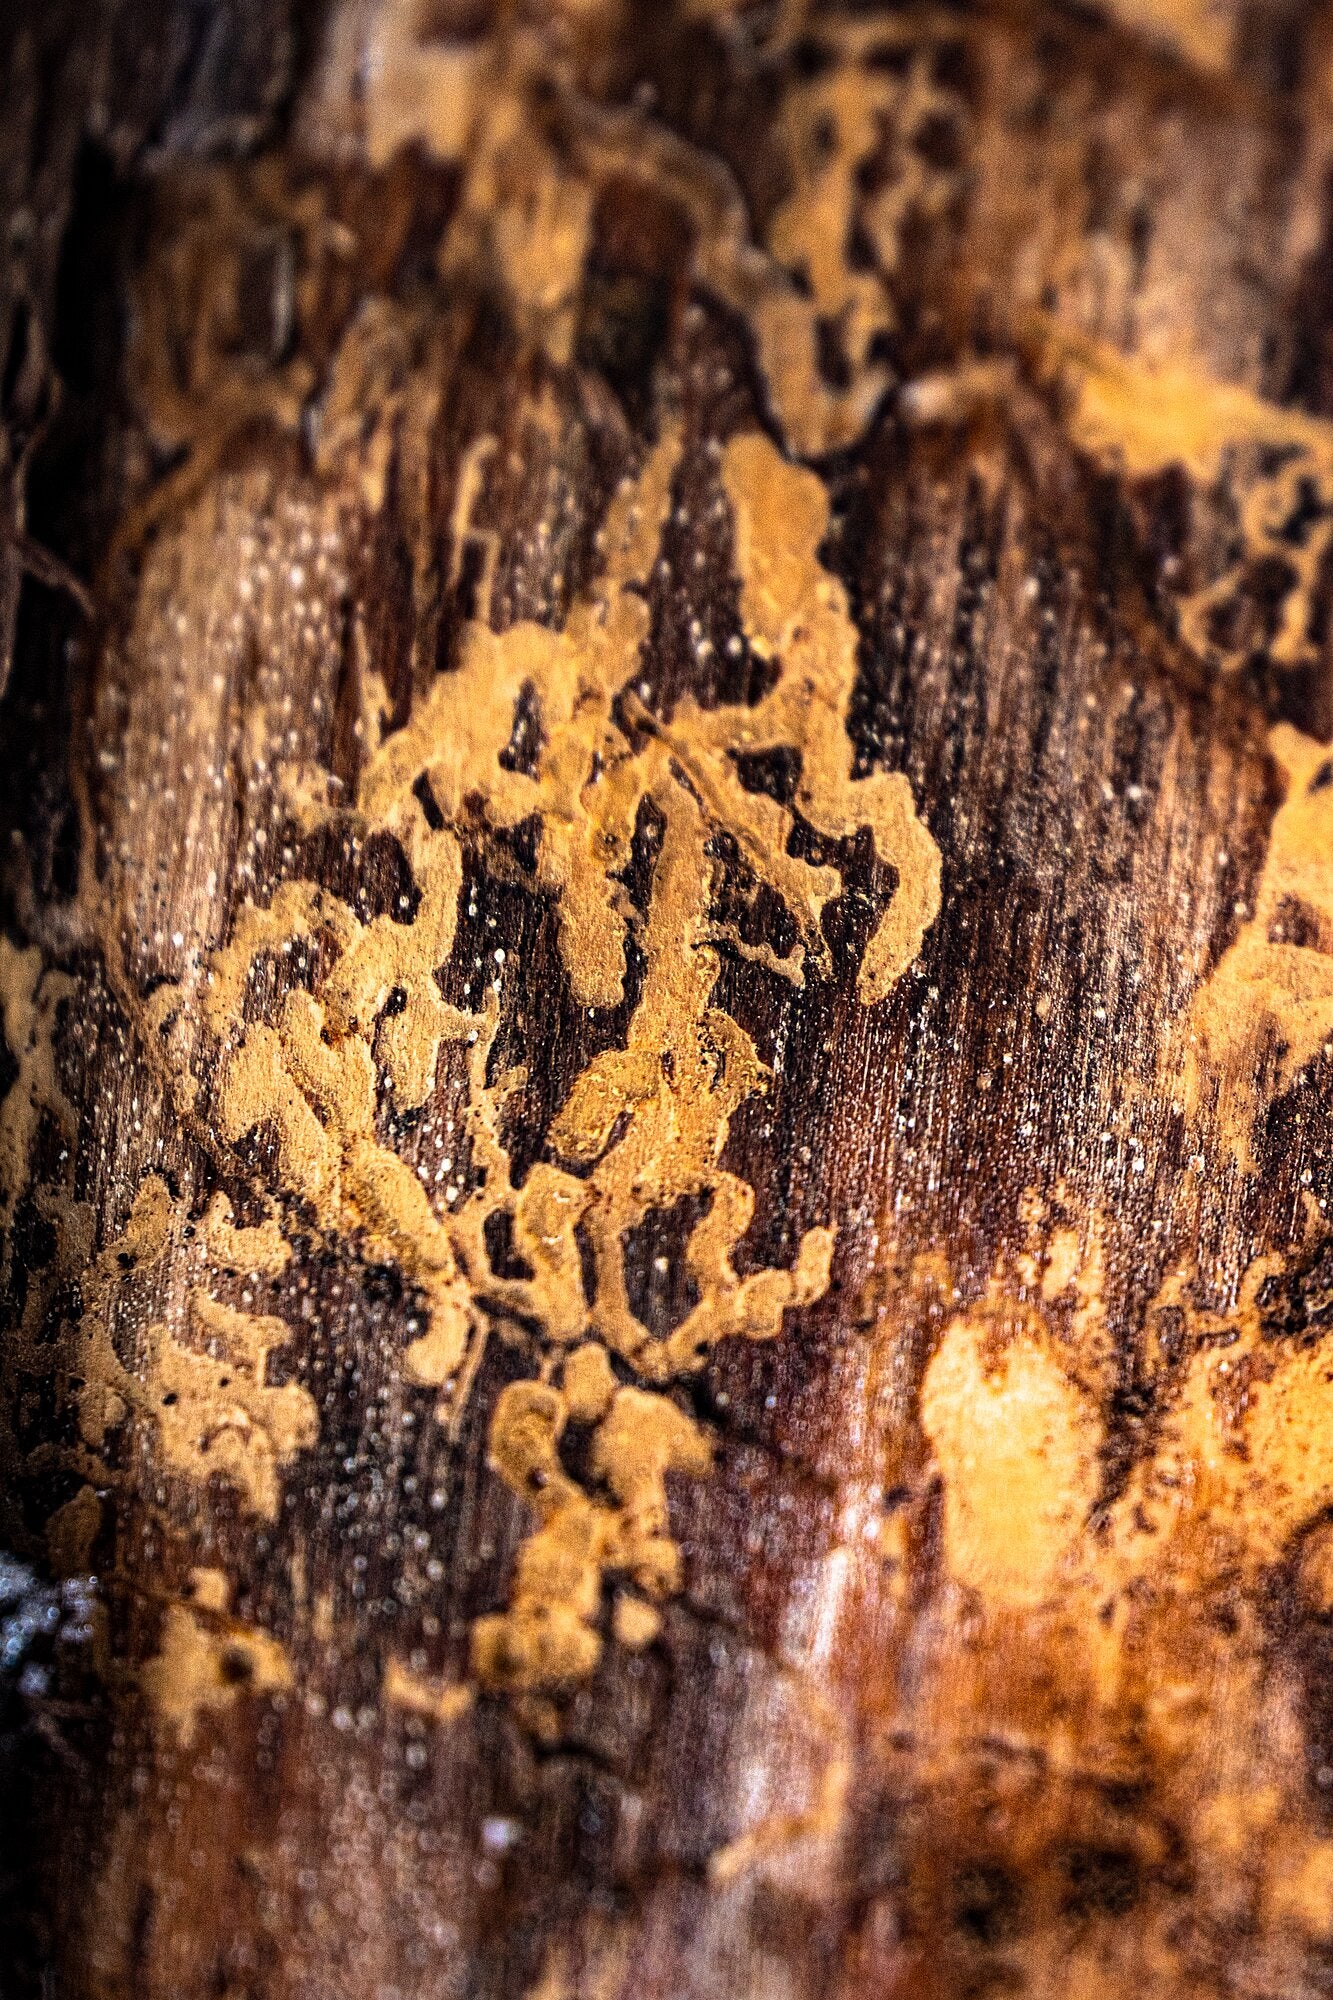 The close-up shot reveals the marks made by bark beetles on the surface of the tree.